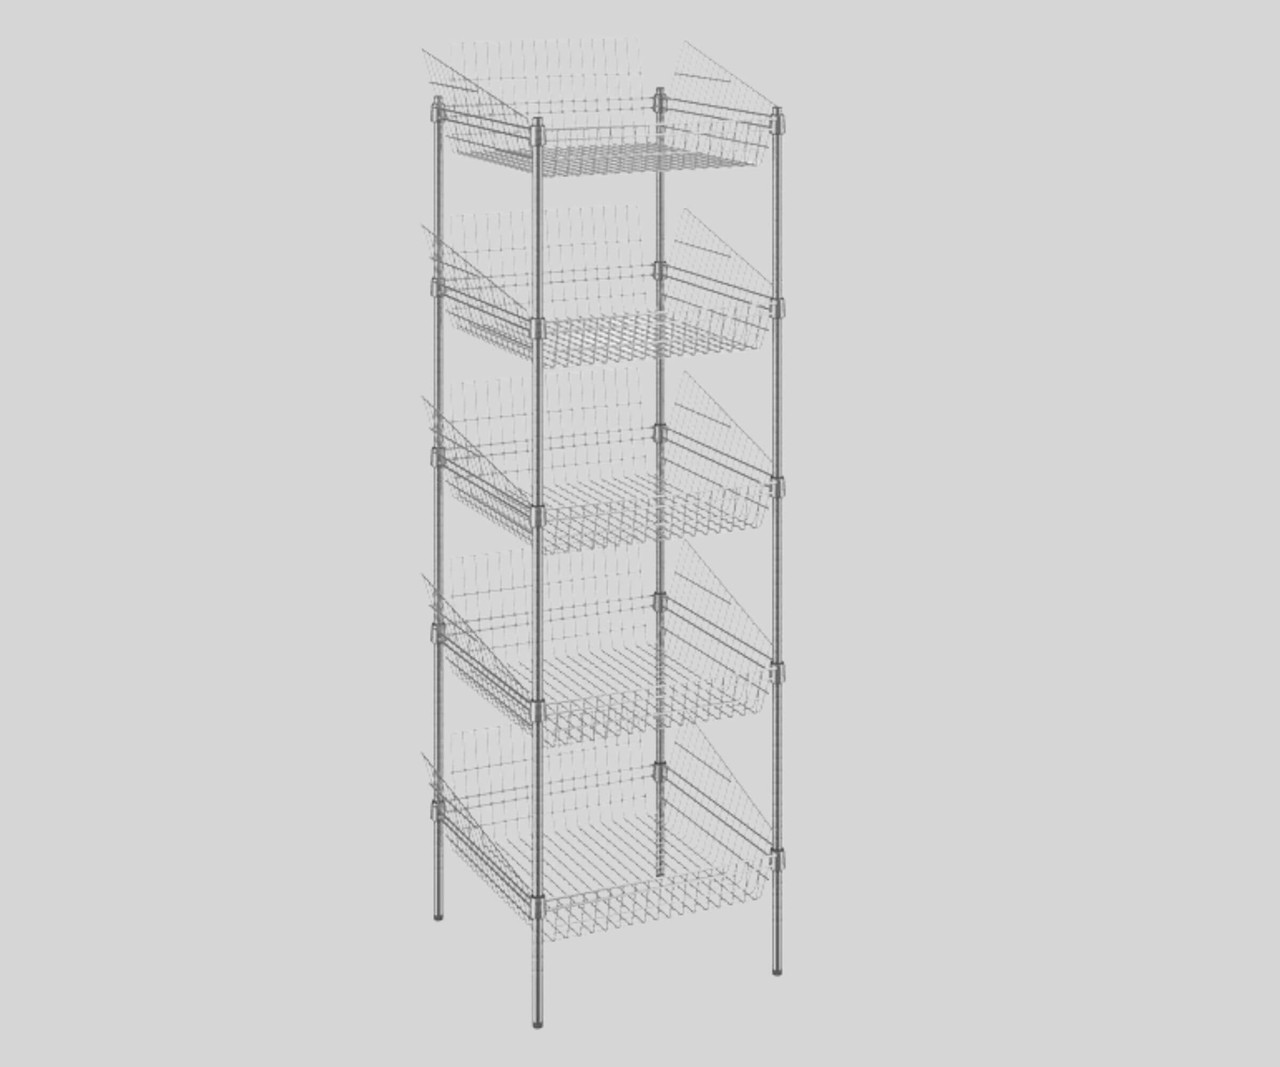 Chicken Pieces CP 24" x 24" x 74" NSF Chrome Stationary 5 Basket Retail Storage Display Stand - Organize Your Merchandise with Style